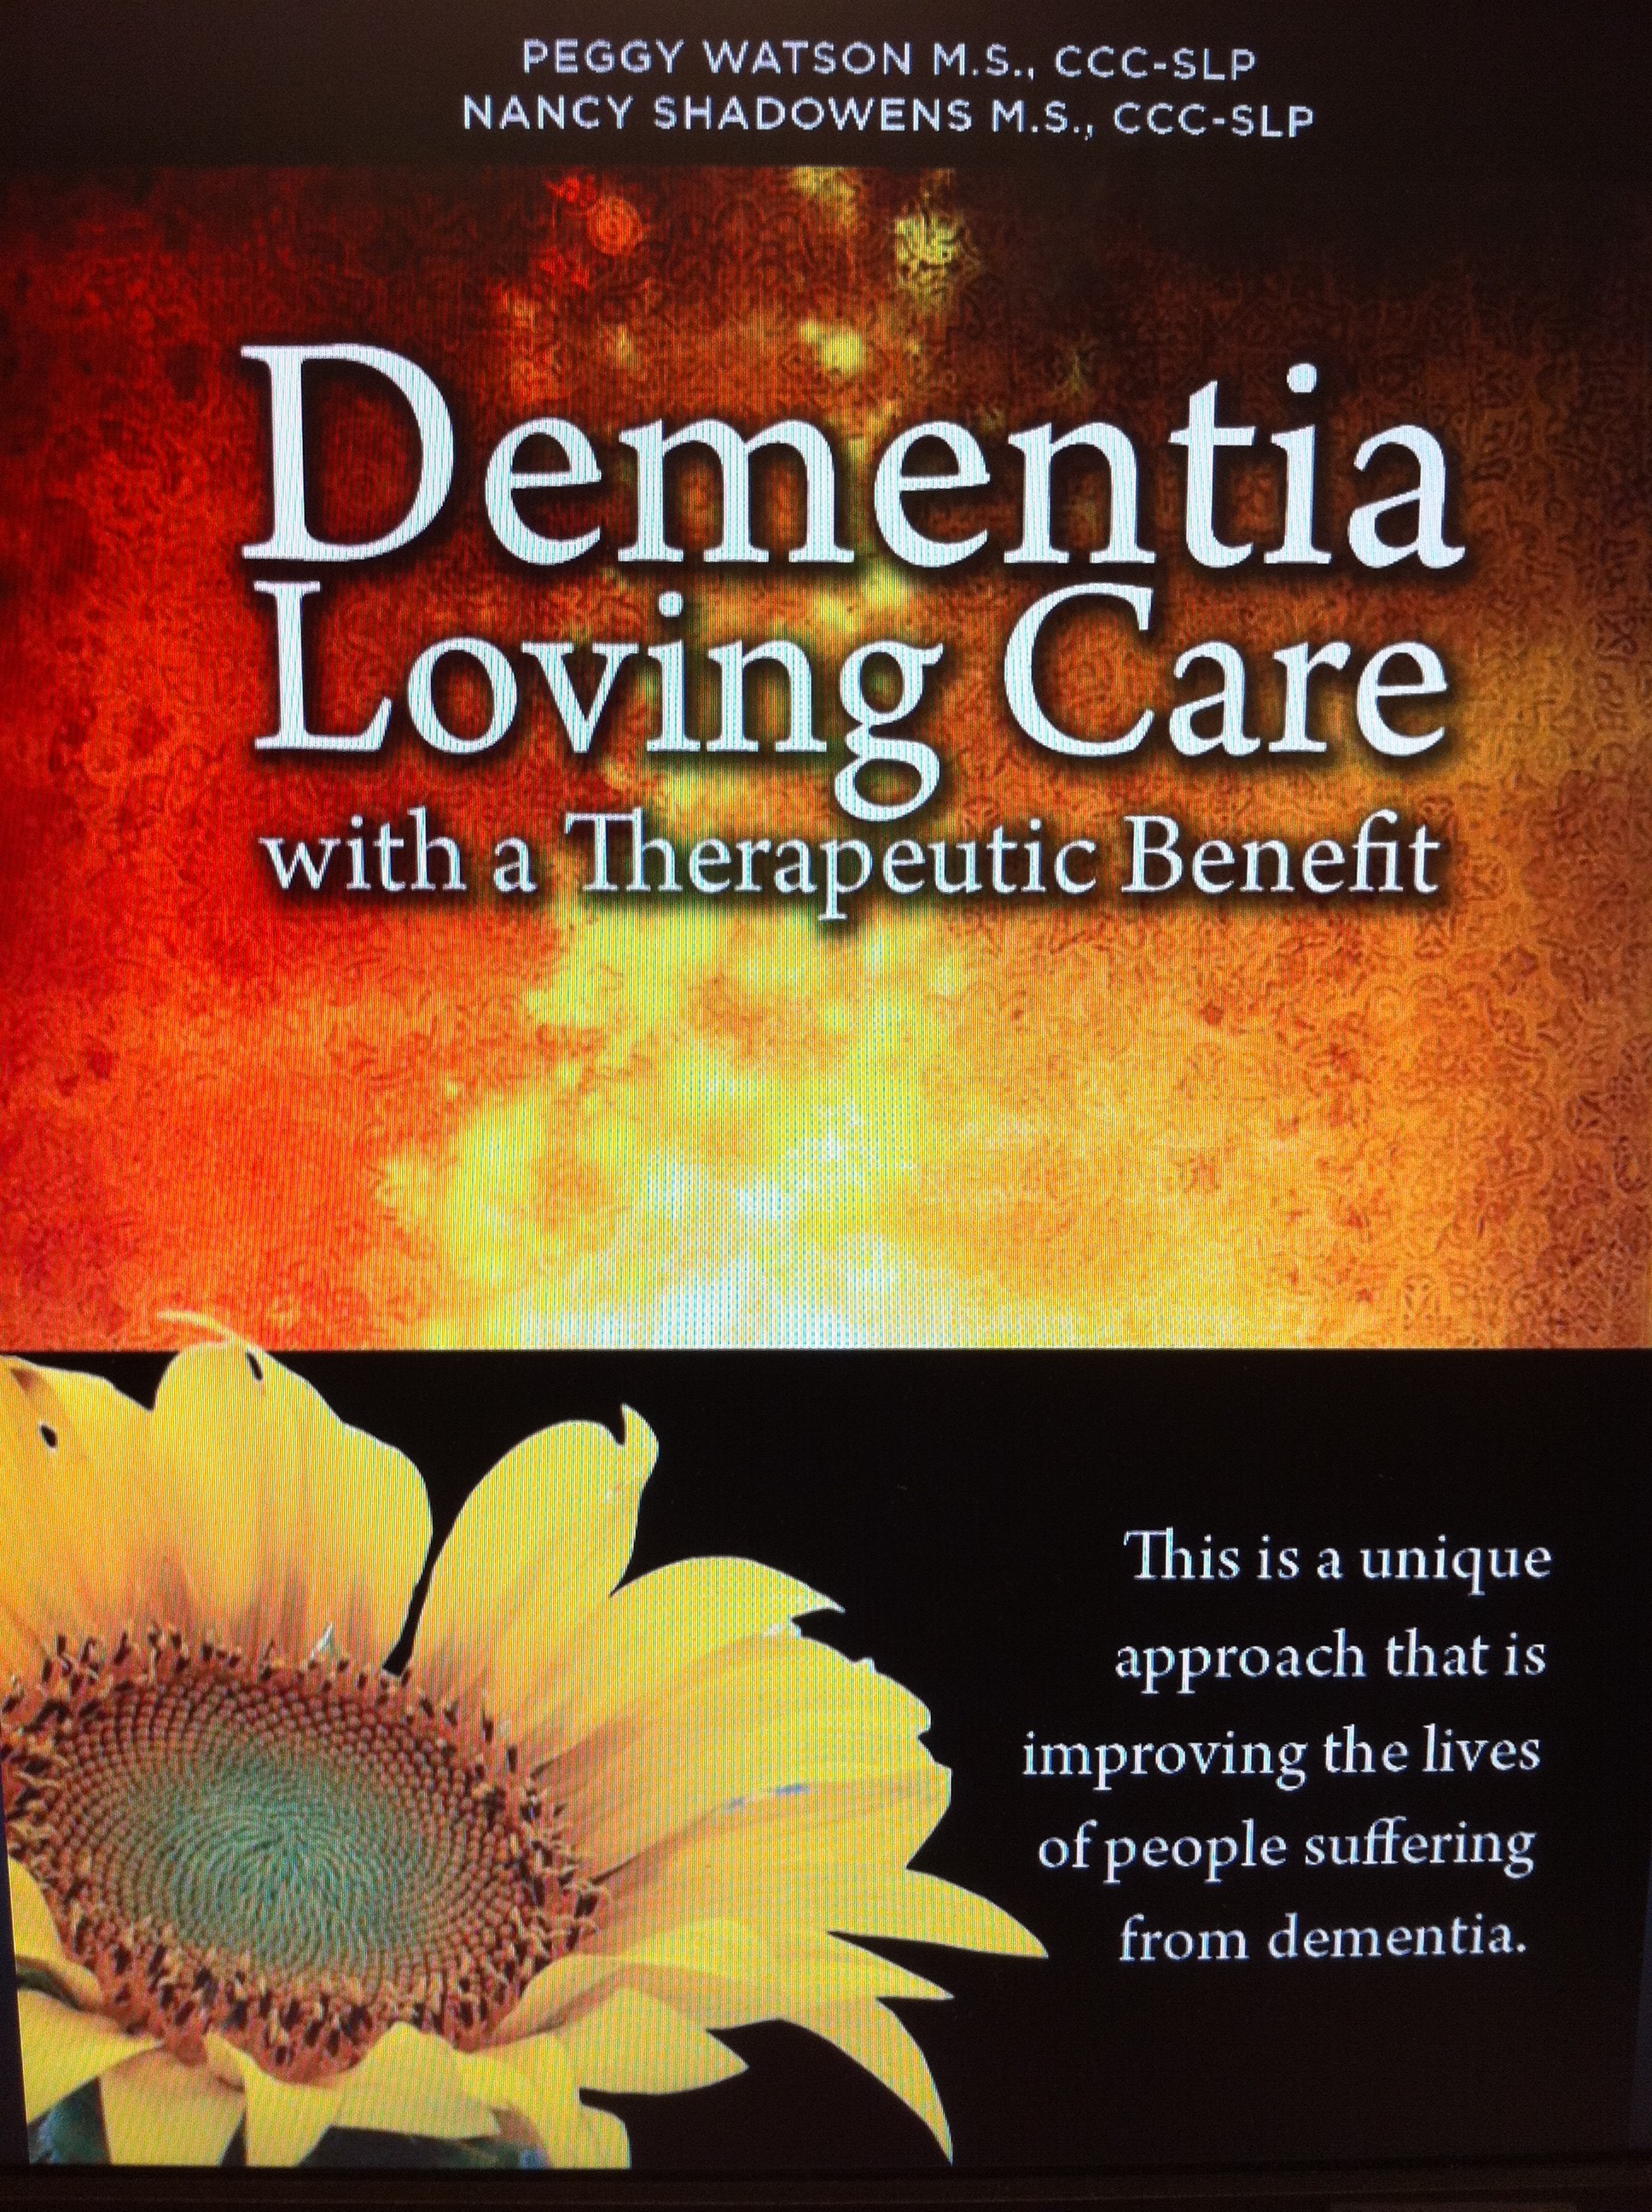 Dementia: Loving Care with a Therapeutic Benefit